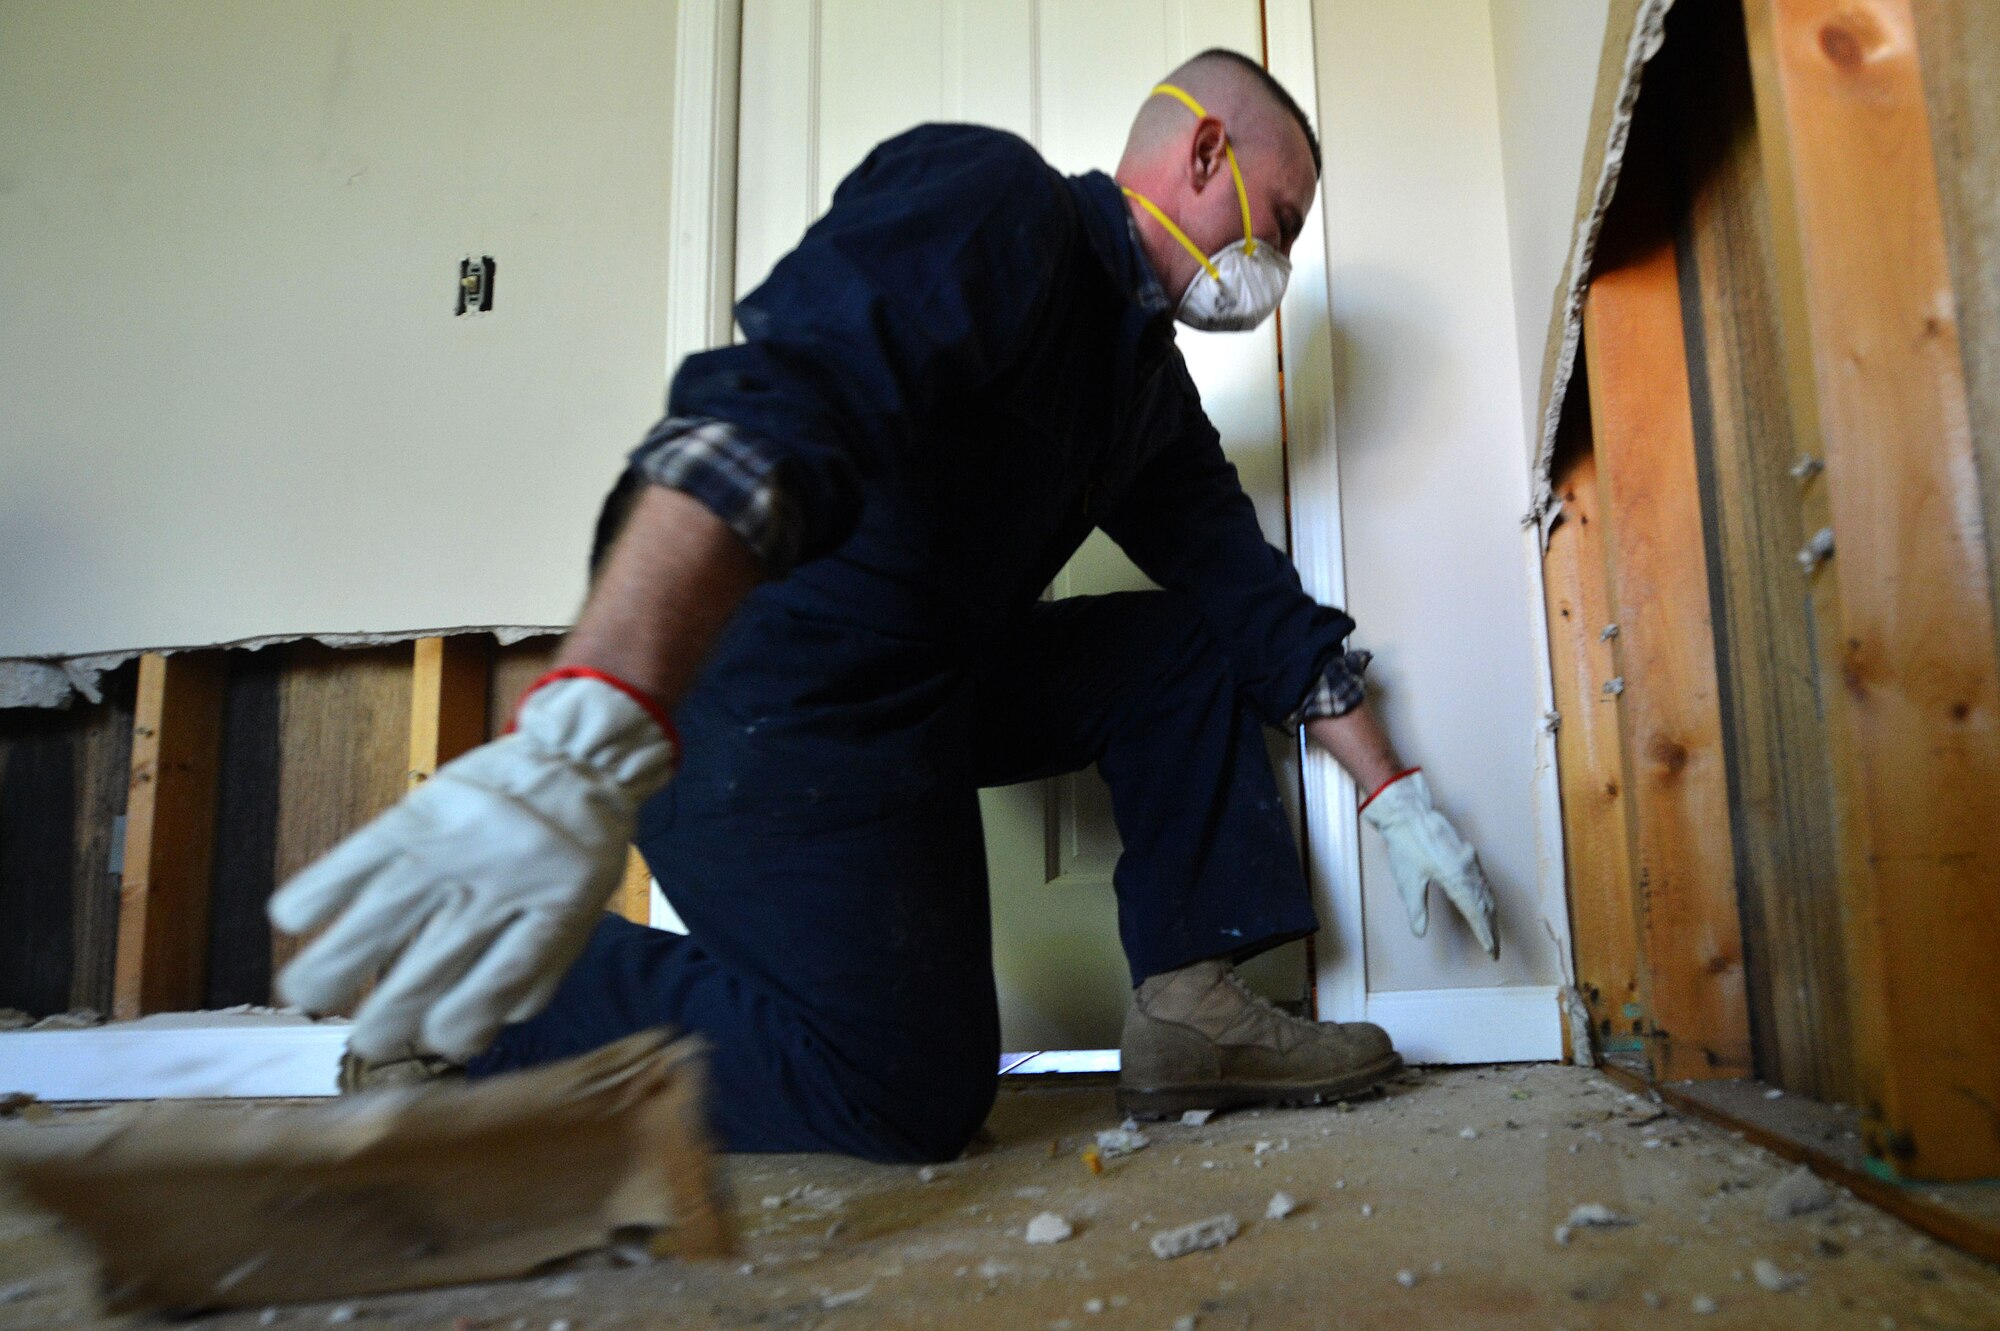 U.S. Air Force Senior Master Sgt. Johnny Hamm, U.S. Air Forces Central Command first sergeant, pulls out moldy baseboards during a disaster relief effort in Sumter, S.C., Oct. 17, 2015. The flood, caused by the storm resulting from Hurricane Joaquin, affected approximately 600 homes in Sumter. (U.S. Air Force photo by Senior Airman Michael Cossaboom/Released)